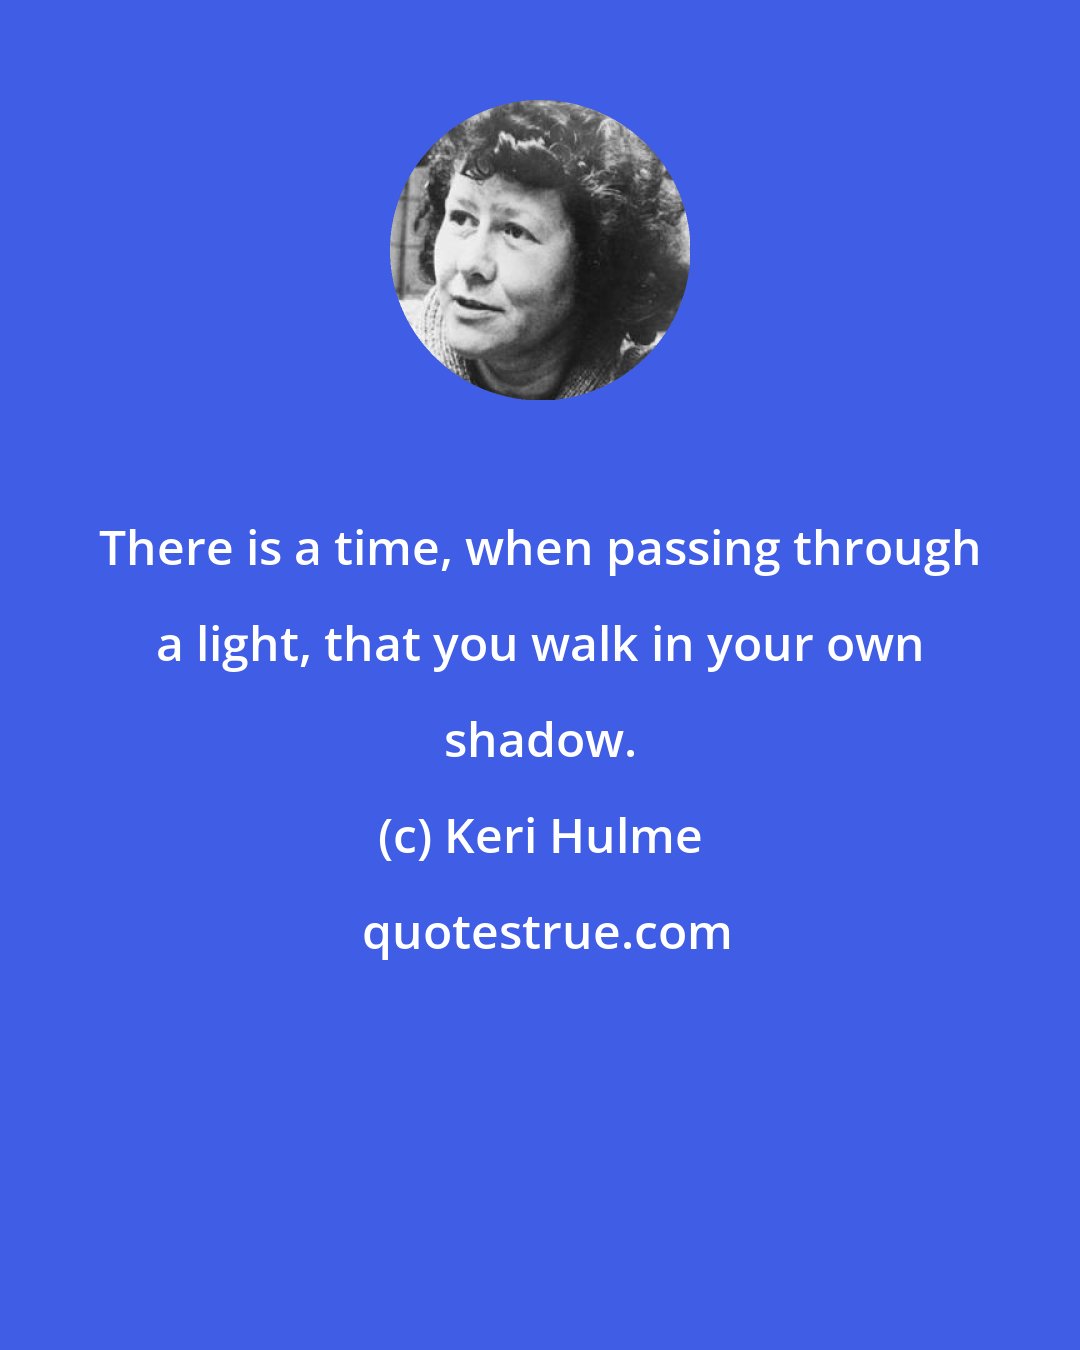 Keri Hulme: There is a time, when passing through a light, that you walk in your own shadow.